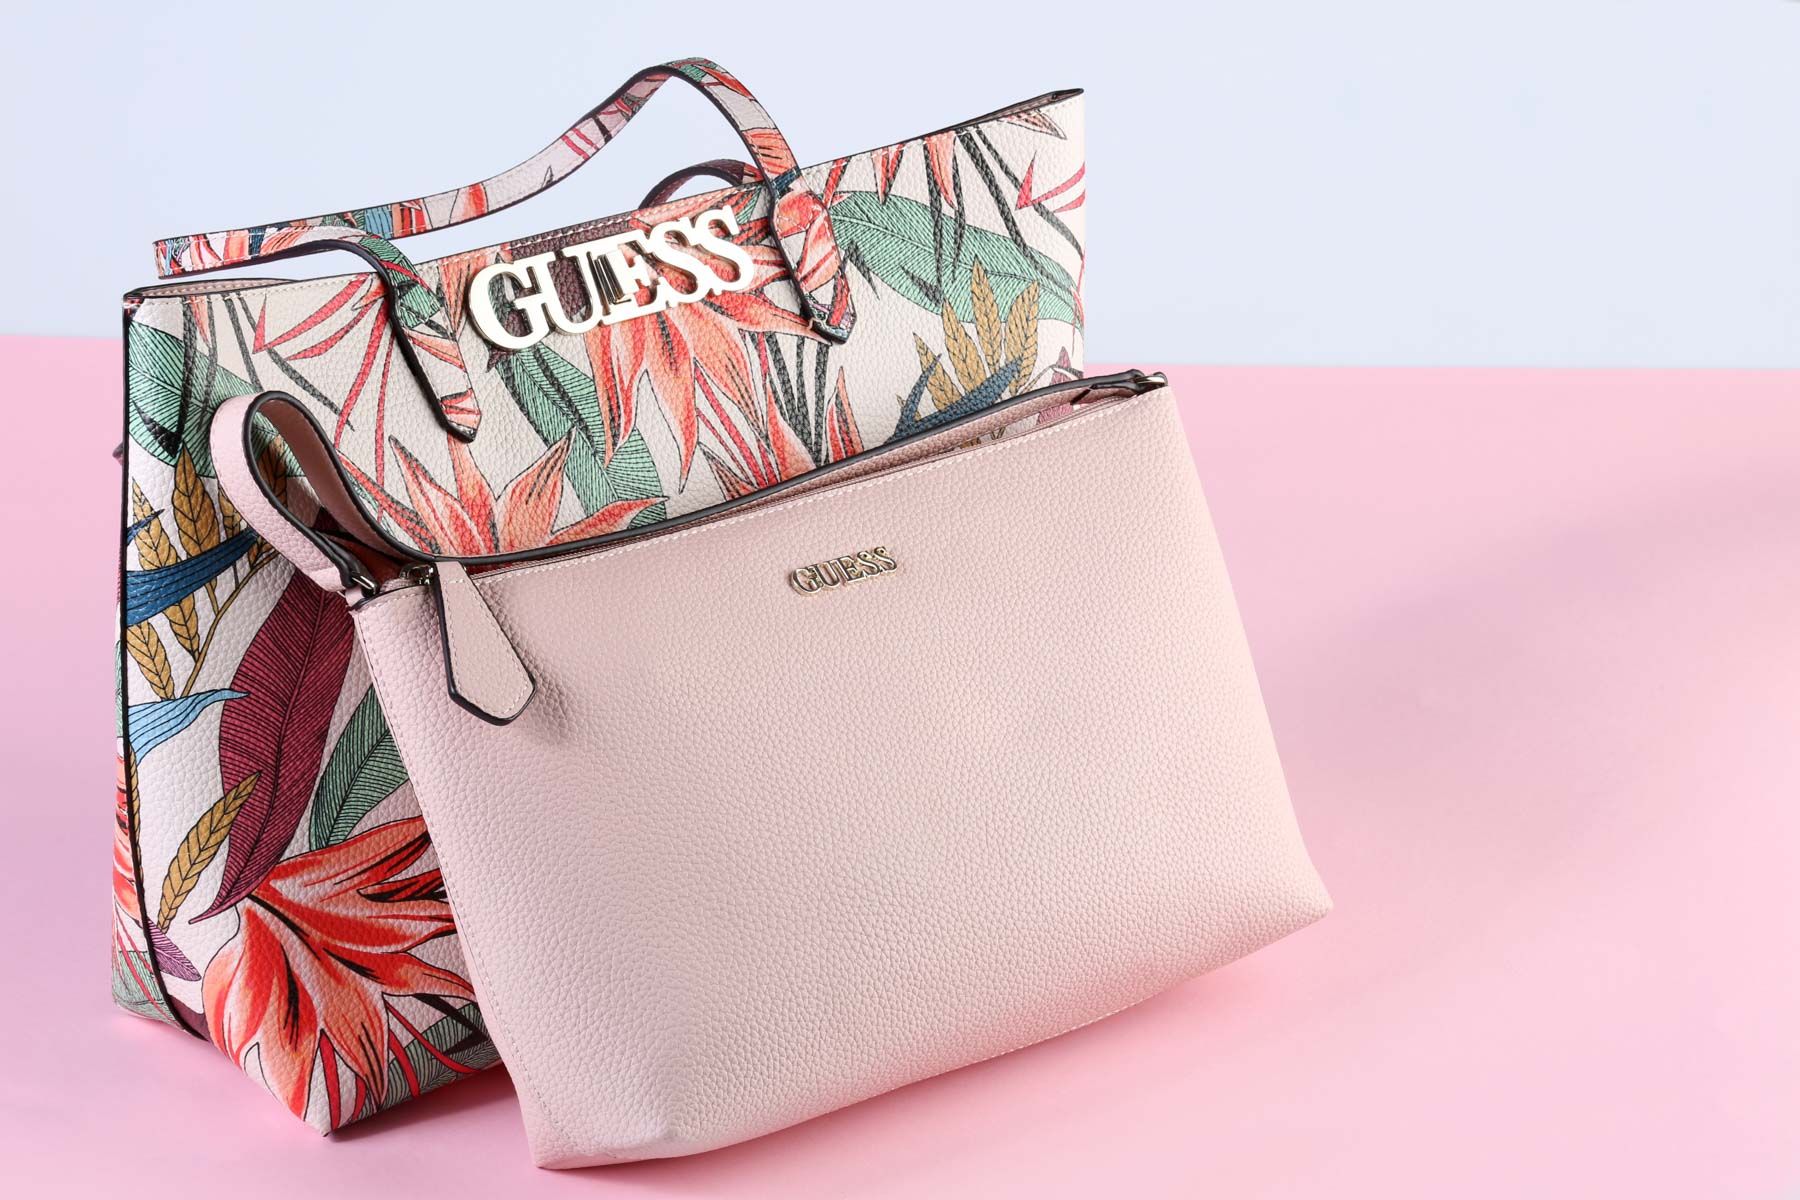 Guess Bags - Meet Spring-Summer Collection